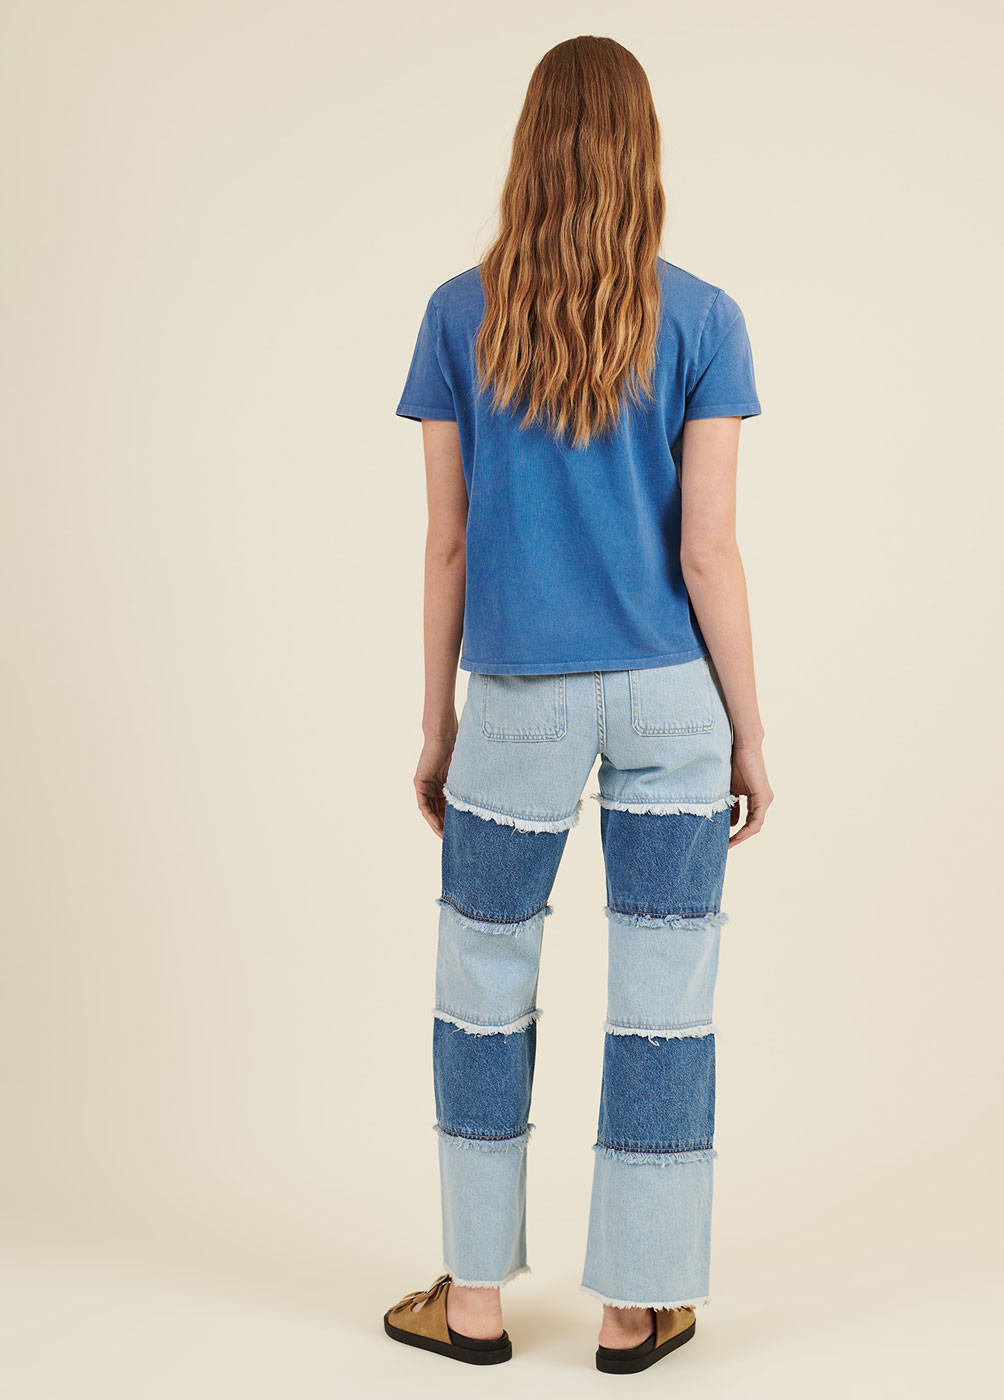 SIRA PANELLED JEANS